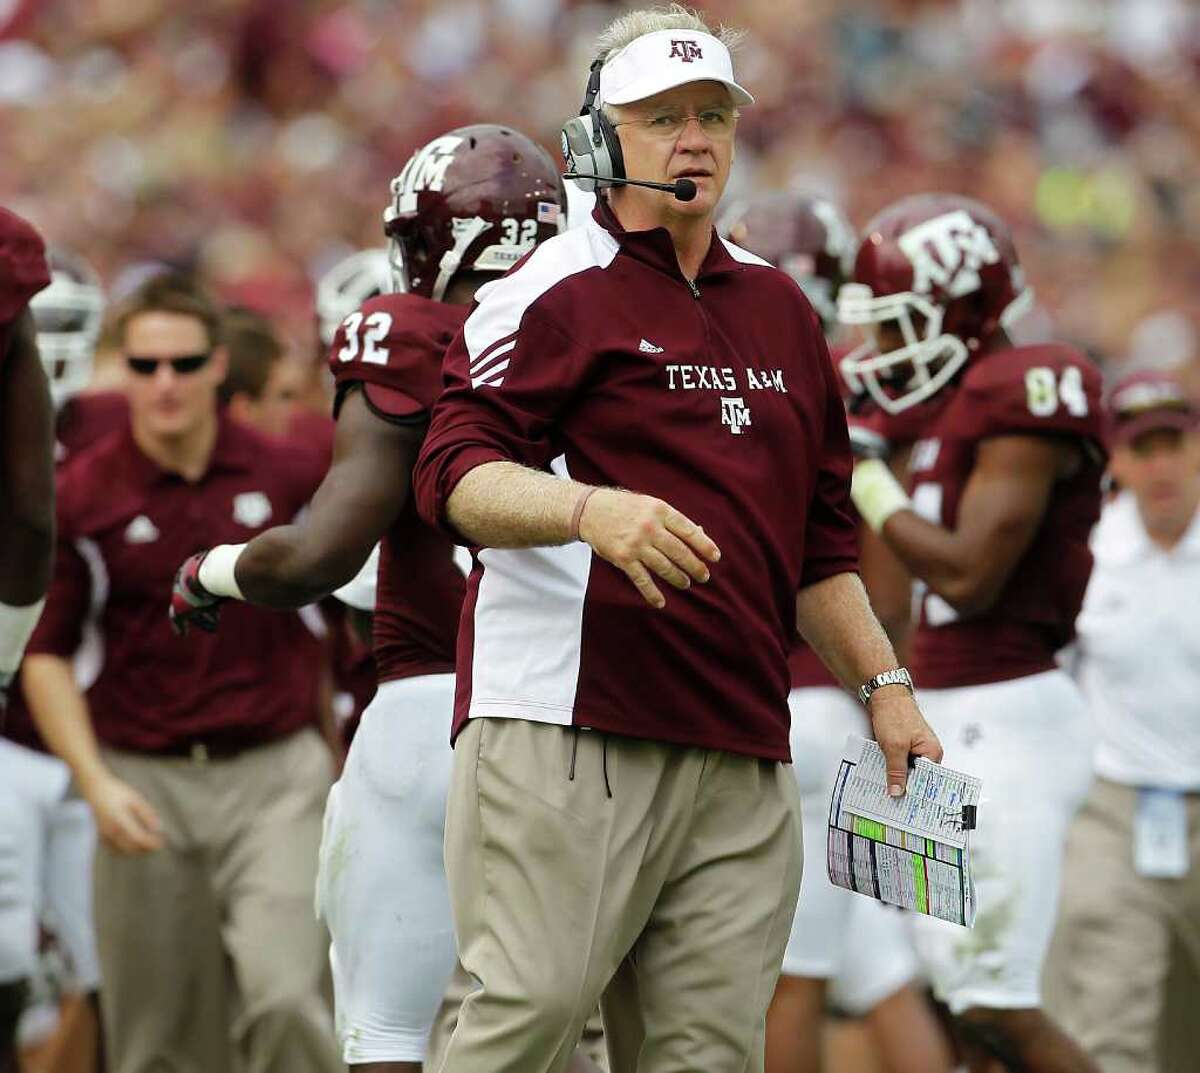 A&M coach Mike Sherman admits his recruiting has leaned heavily toward offense, and the defense has suffered as a result. But he appears to be addressing the problem now.